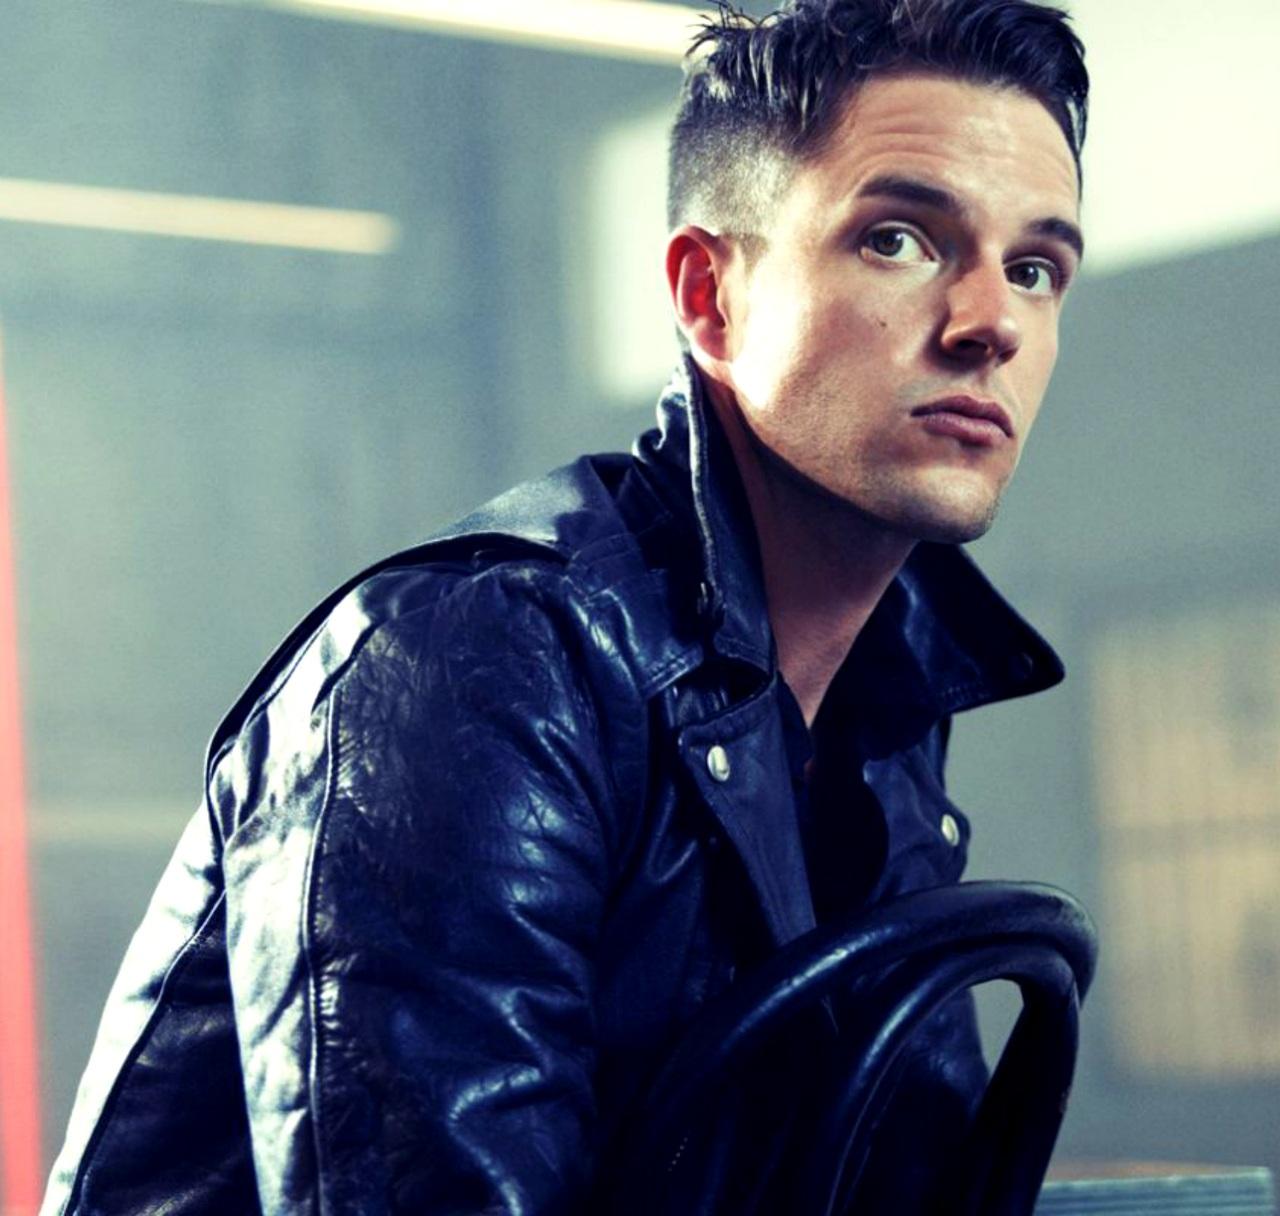 Candaces Man Candy: Brandon Flowers | Notes Between Friends